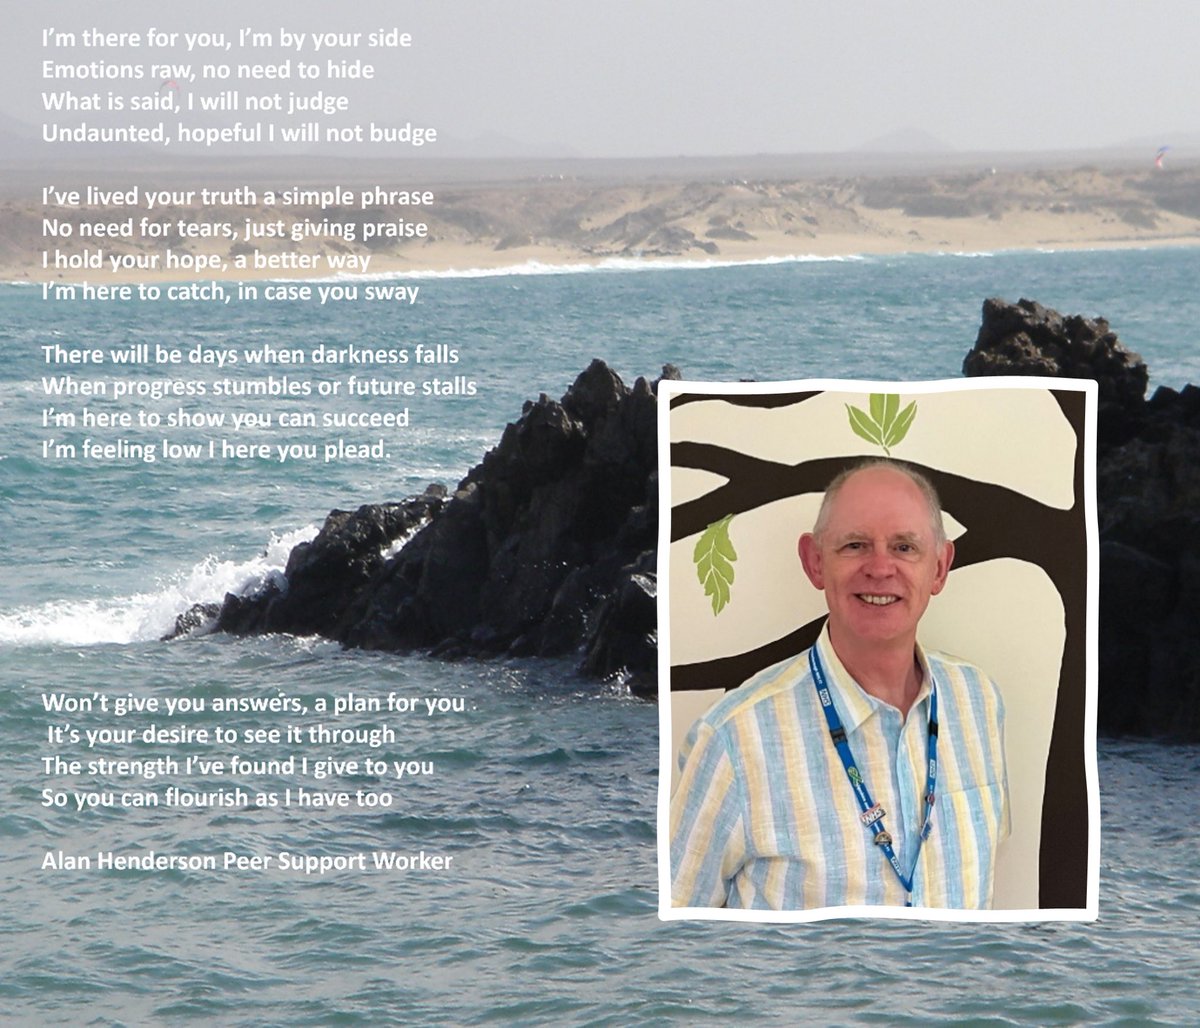 Today is #HOPE #HighlightingOurPeersExperience day at CPFT, so today we introduce you to Alan - Peer Support Worker and poet! Alan wrote this poem to express what peer support means to him. Thank you, Alan, for sharing your talent to help promote the power of peer support ☀️